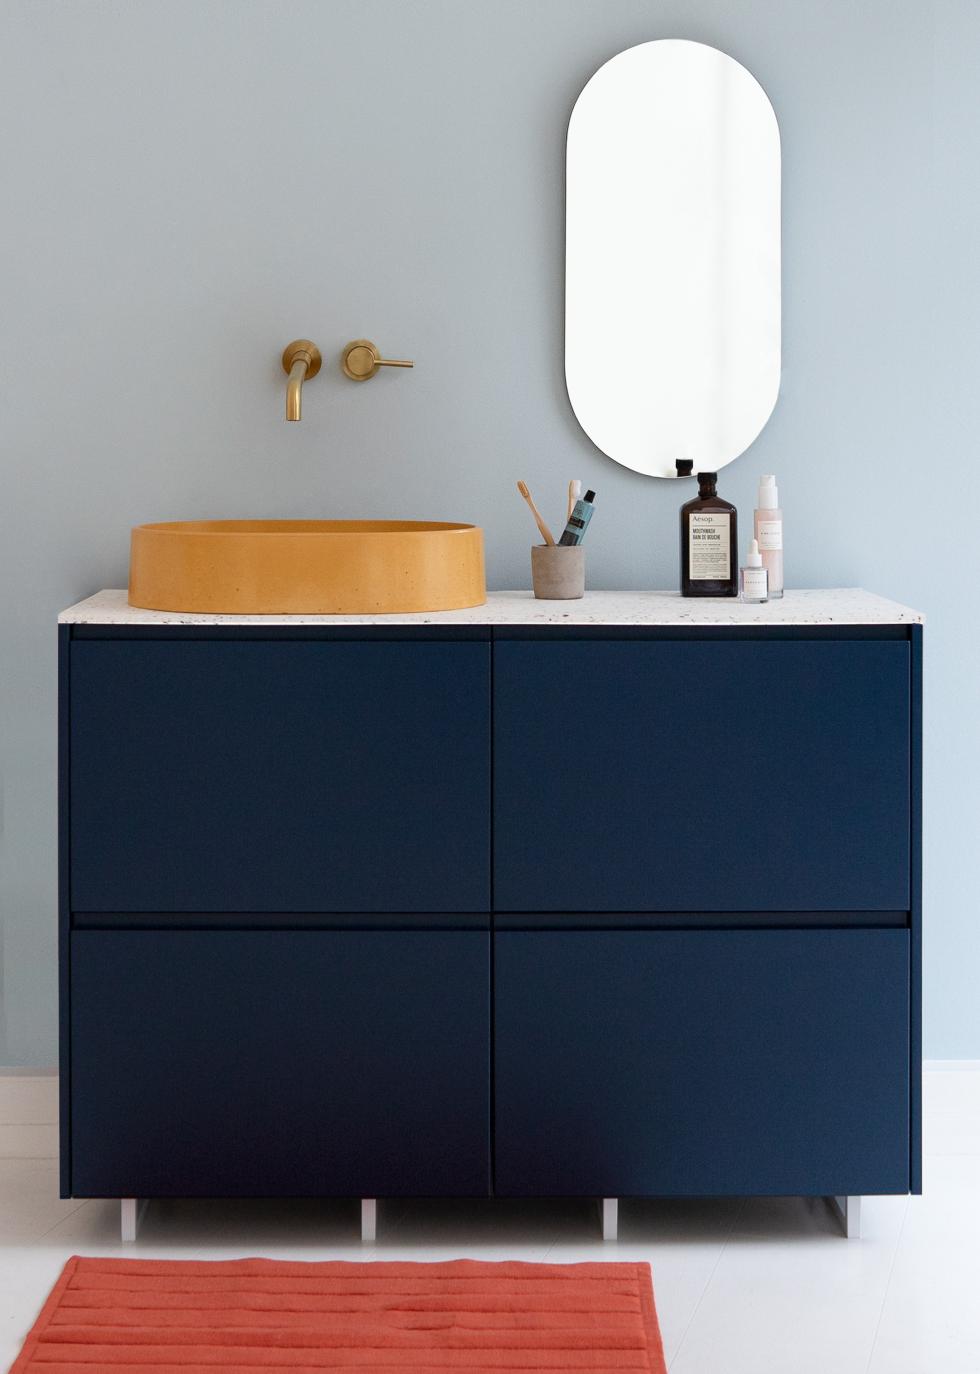 Midnight blue floor-standing bathroom cabinet with U-shaped fronts, yellow washbasin.